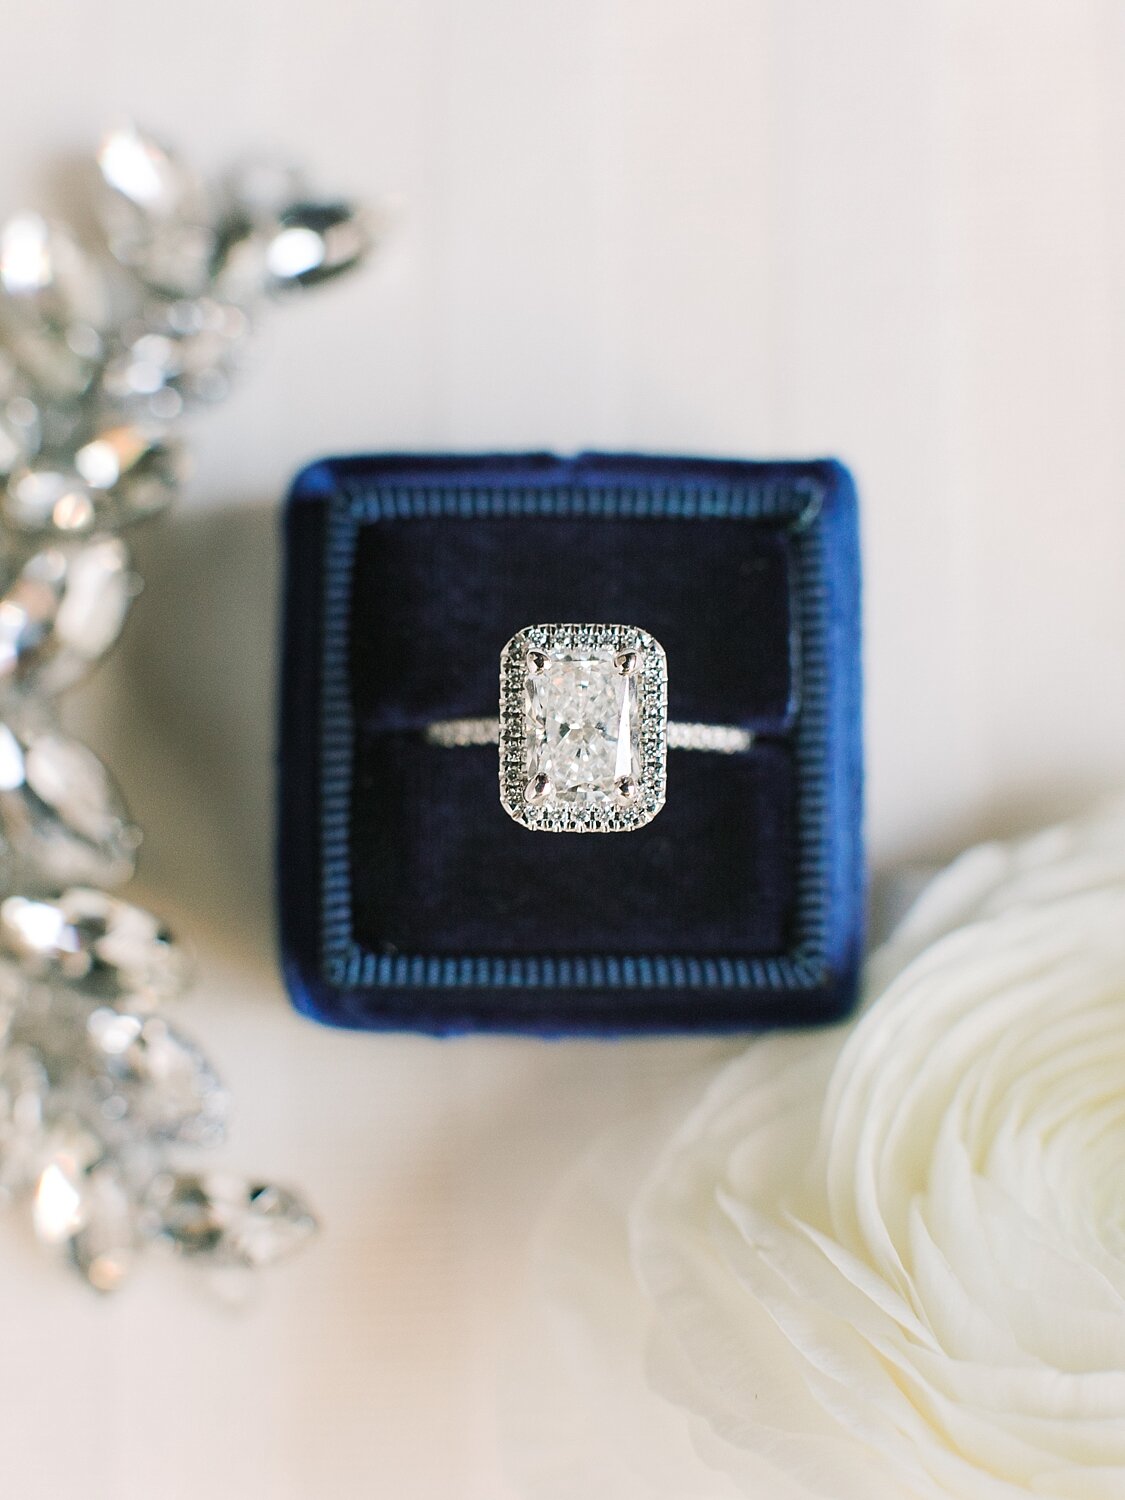 ring in navy blue box photographed by Asher Gardner Photography